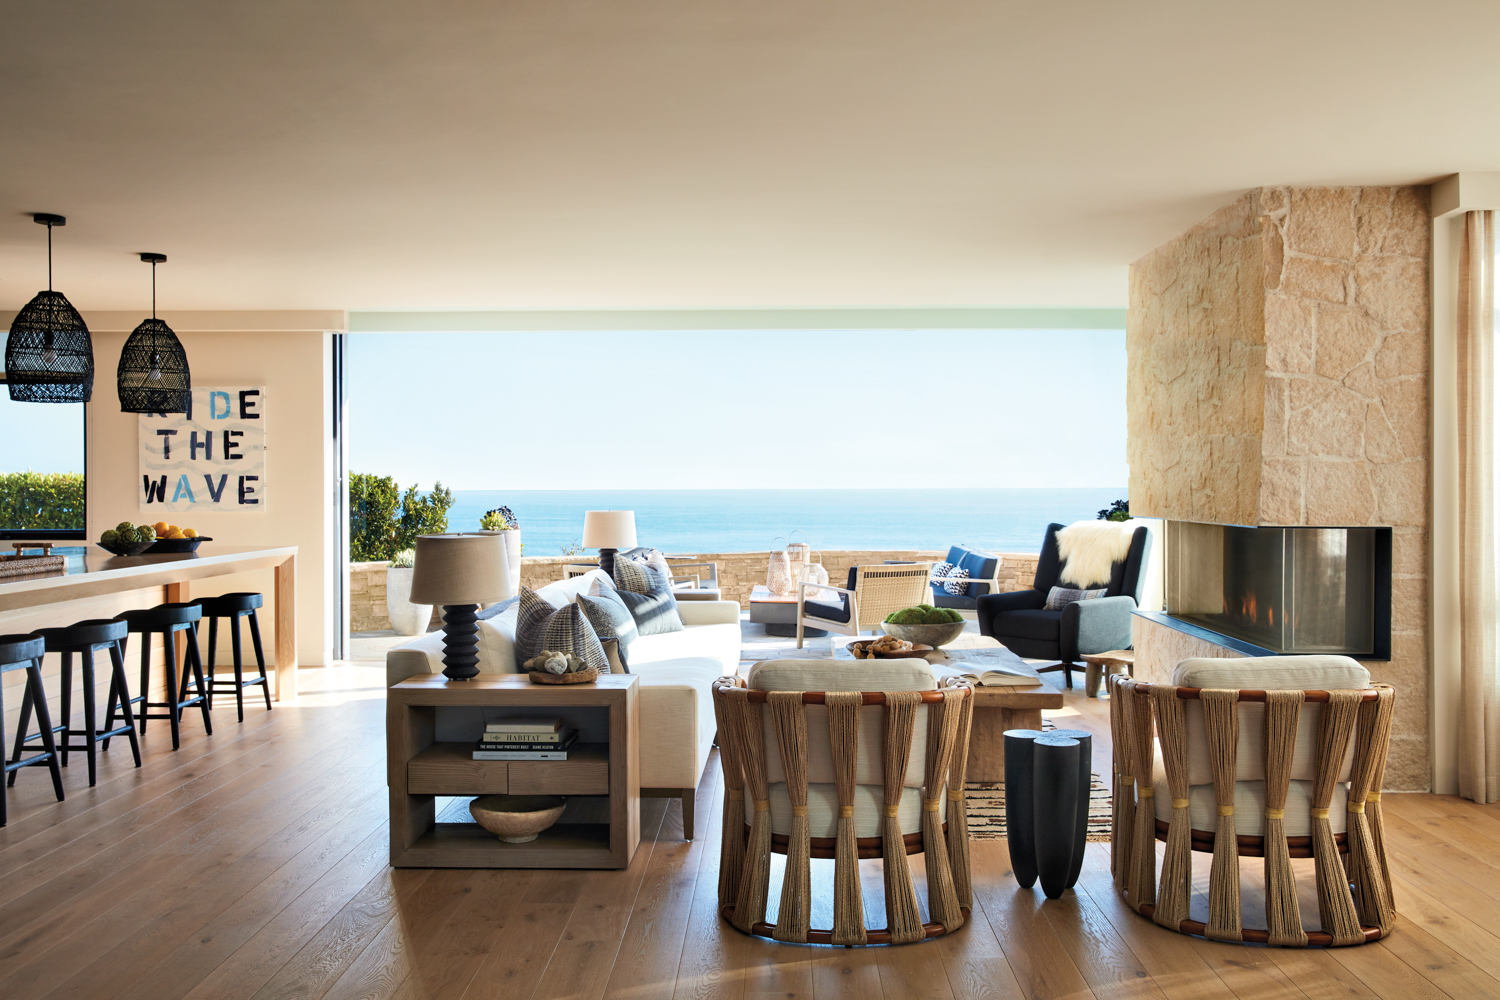 Clean-Lined Interiors Frame Panoramic Views Of The Pacific In SoCal